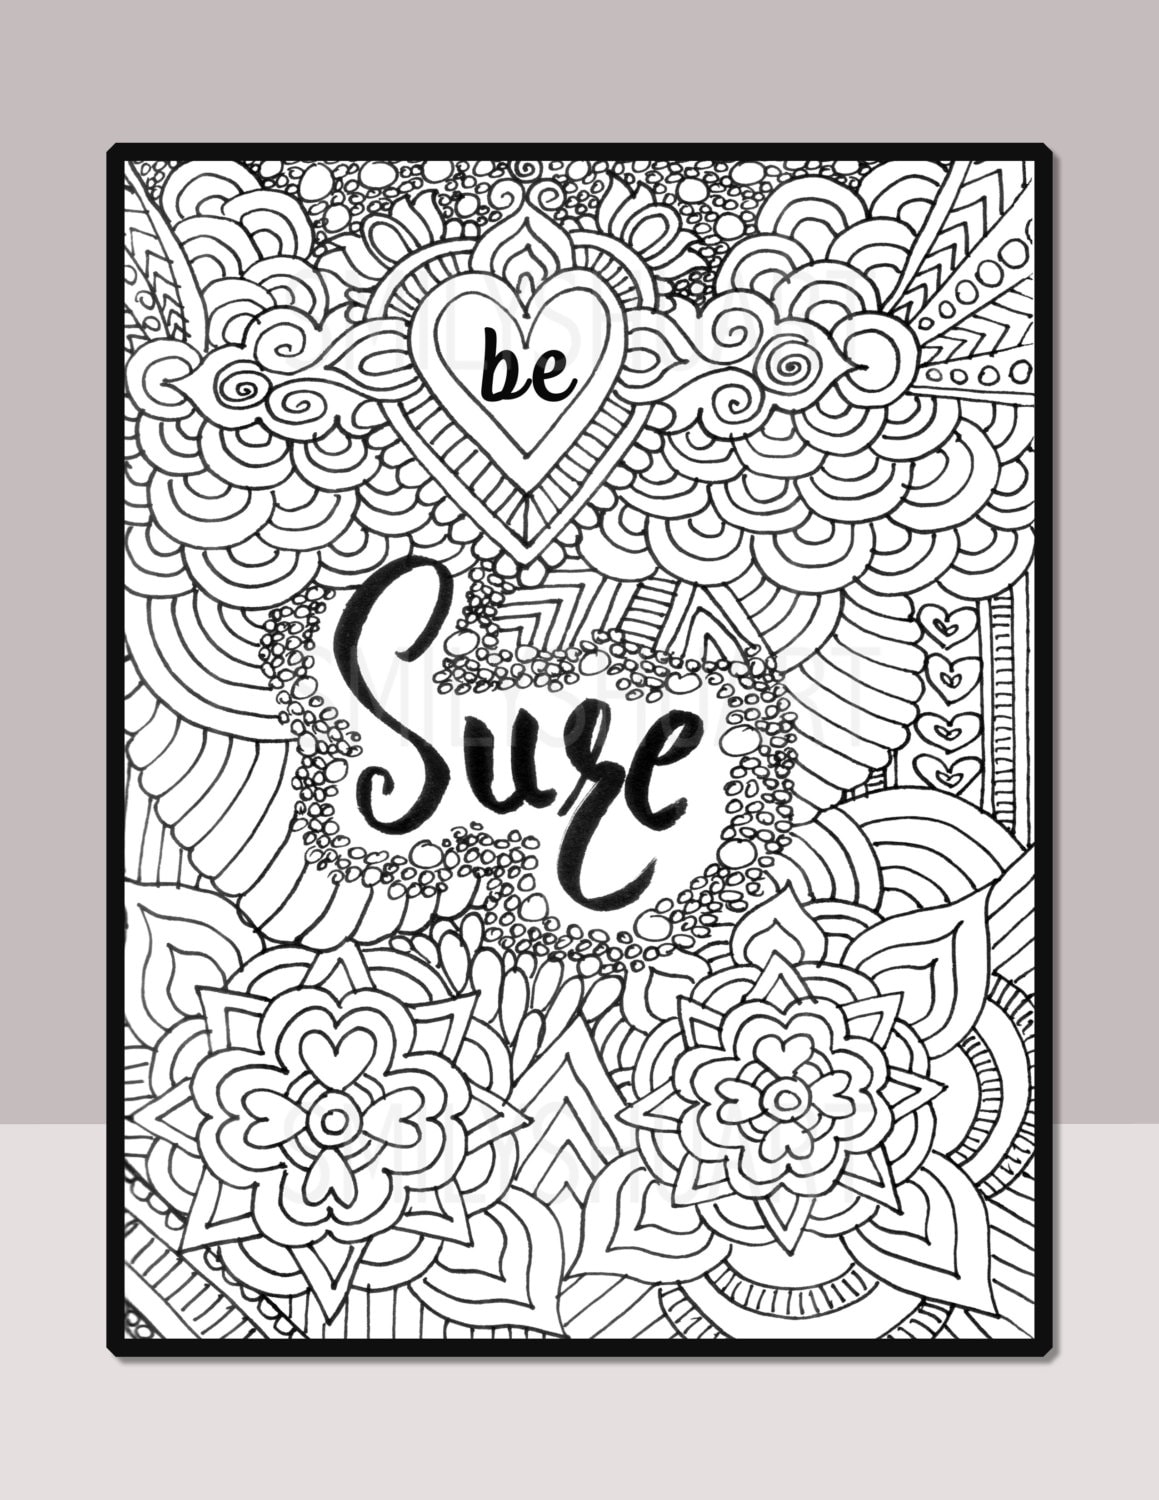 Be sure printable motivational quote self help adult coloring page henna design quote coloring book mindfulness coloring mandala design